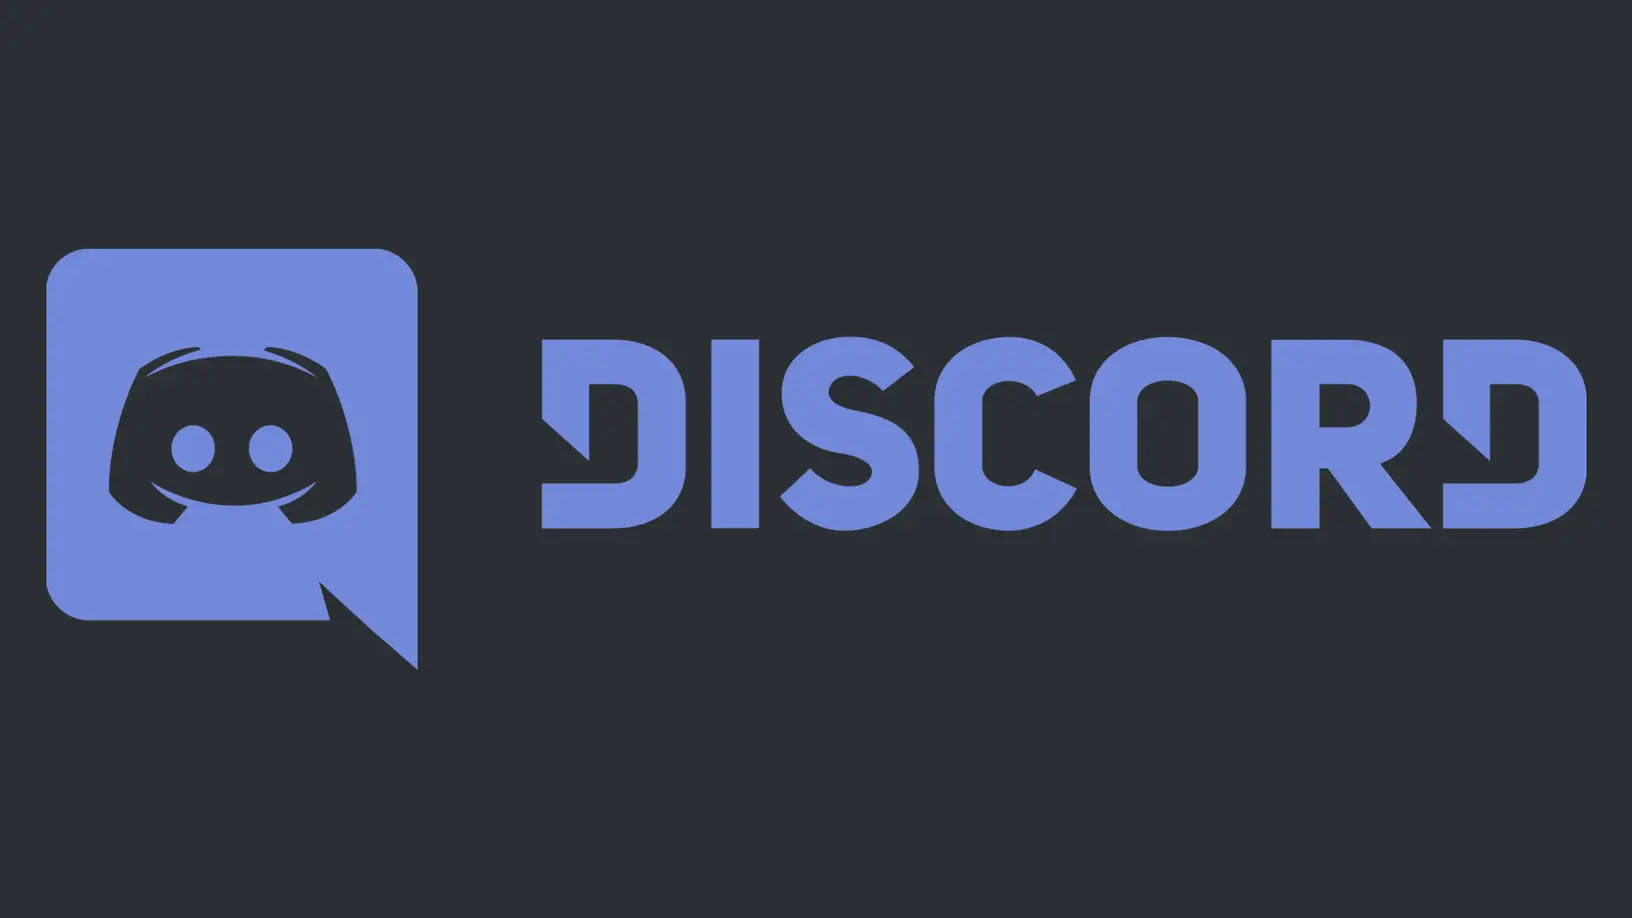 Sony Announces Discord Investment and Partnership